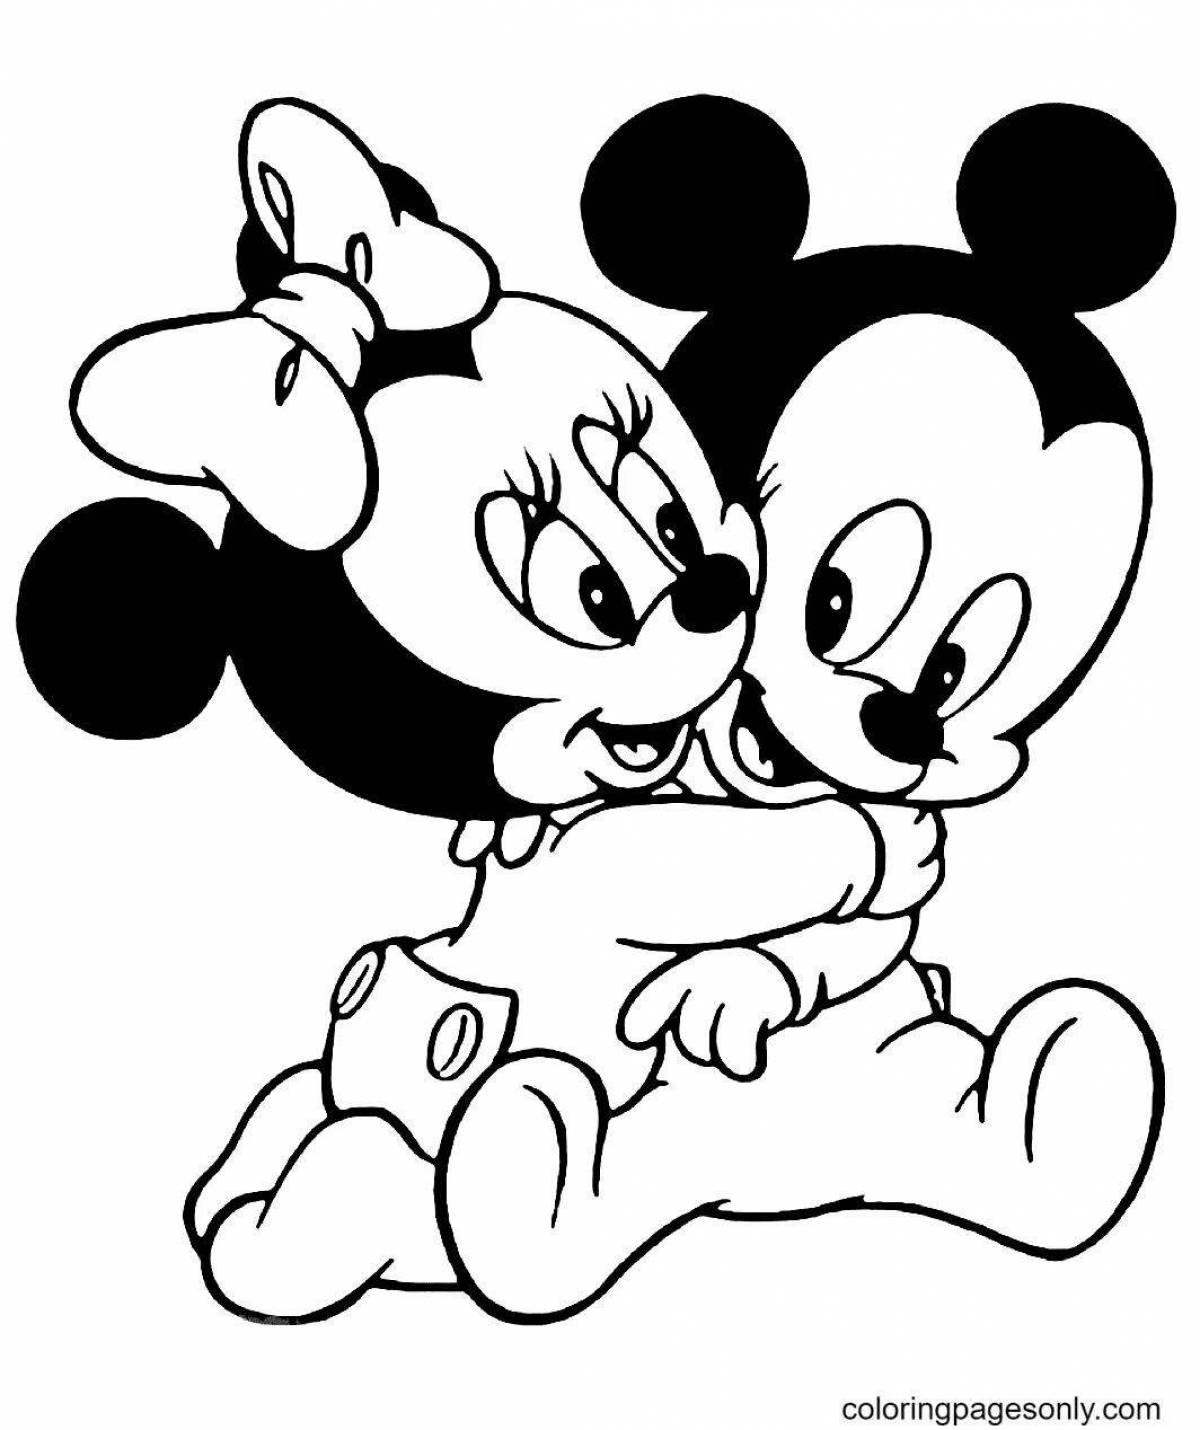 Mickey Mouse and Minnie Mouse #9